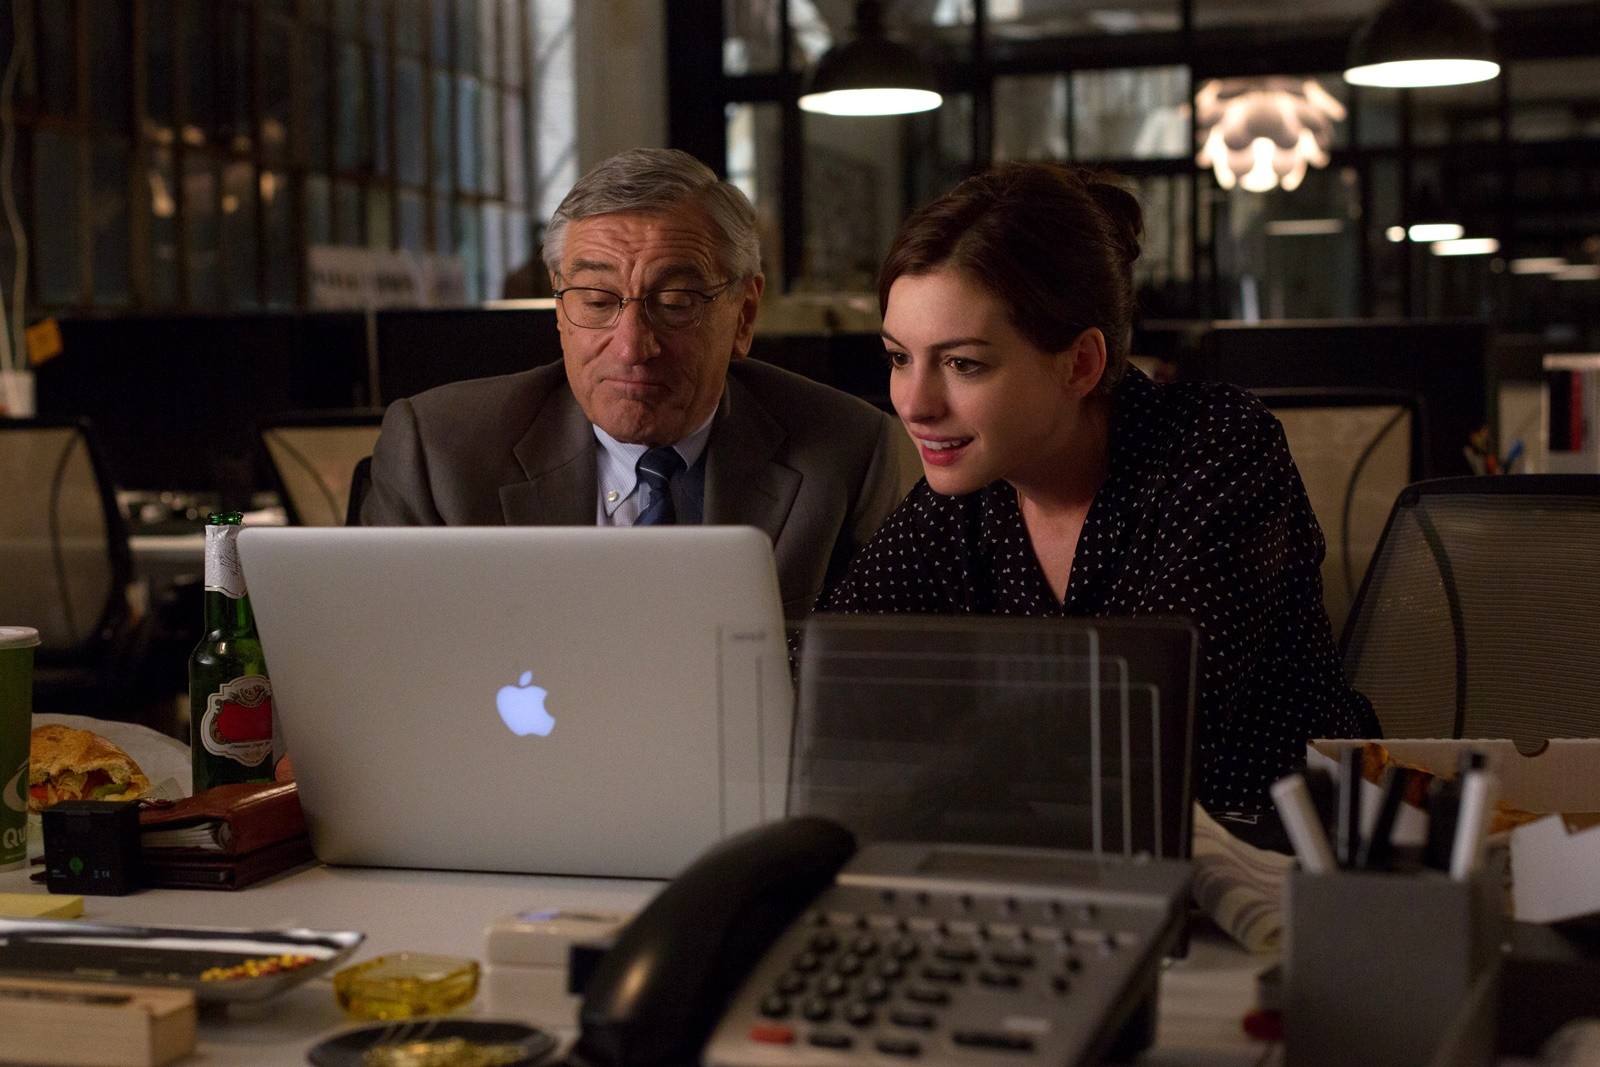 Robert De Niro stars as Ben Whittaker and Anne Hathaway stars as Jules Ostin in Warner Bros. Pictures' The Intern (2015)